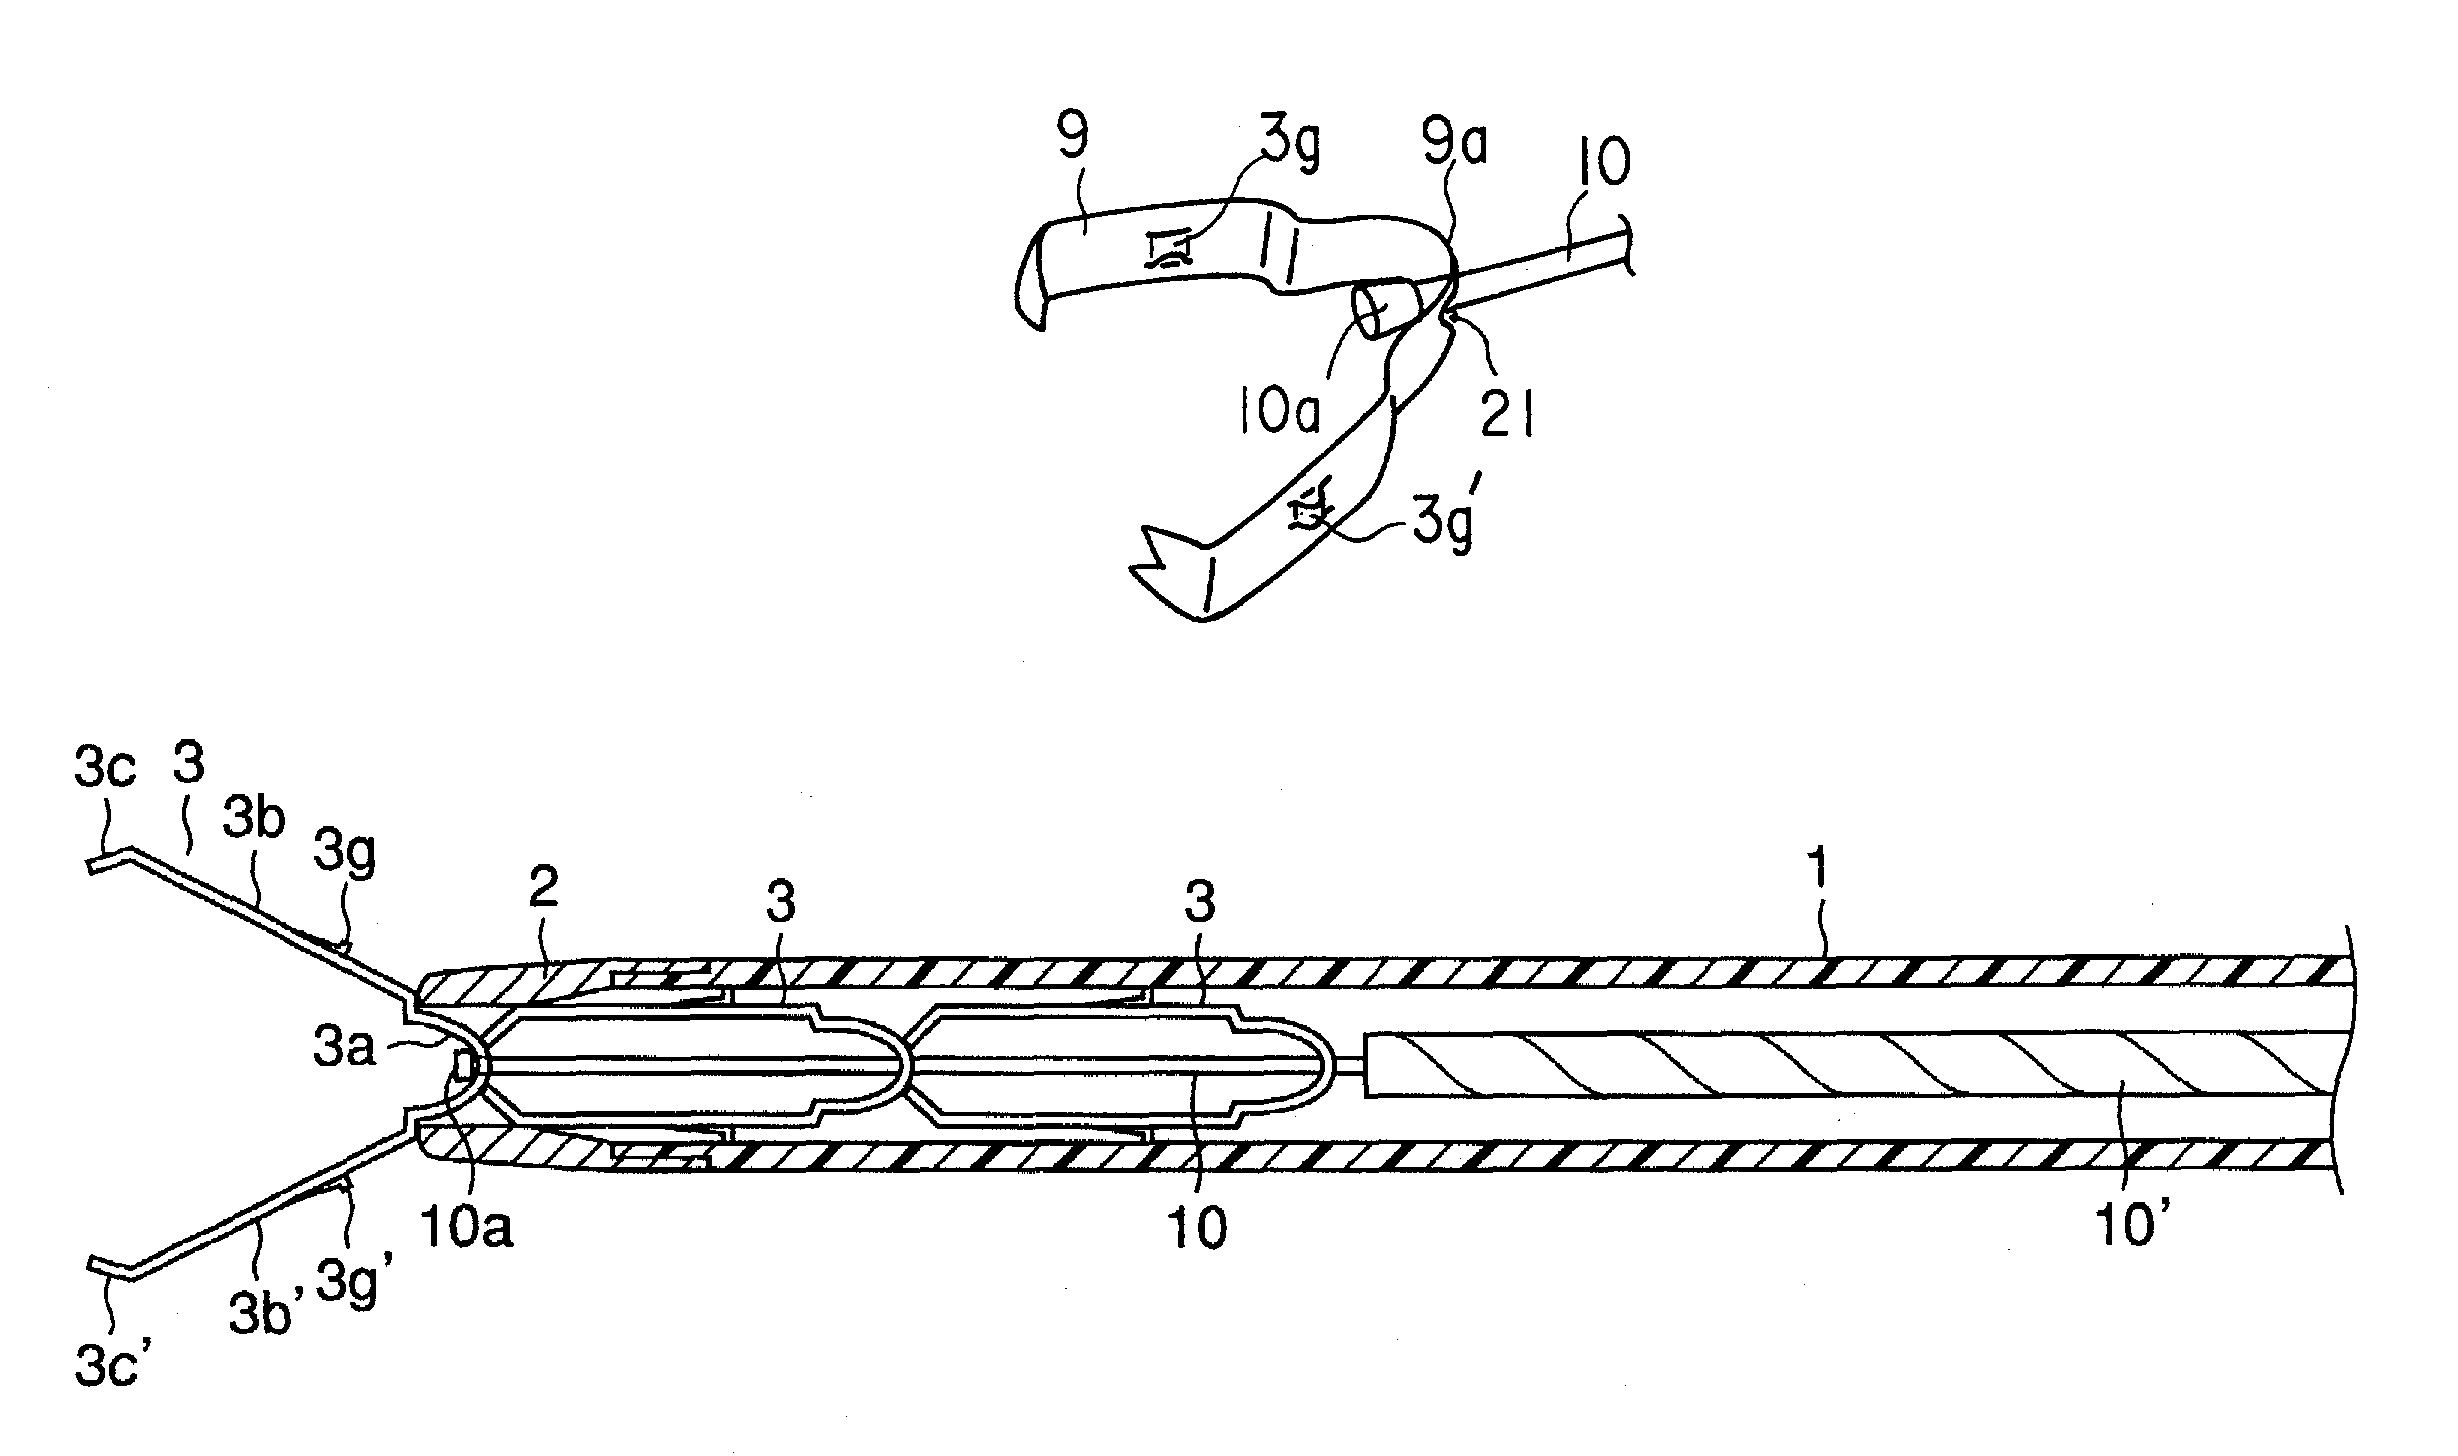 Apparatus for ligating living tissues